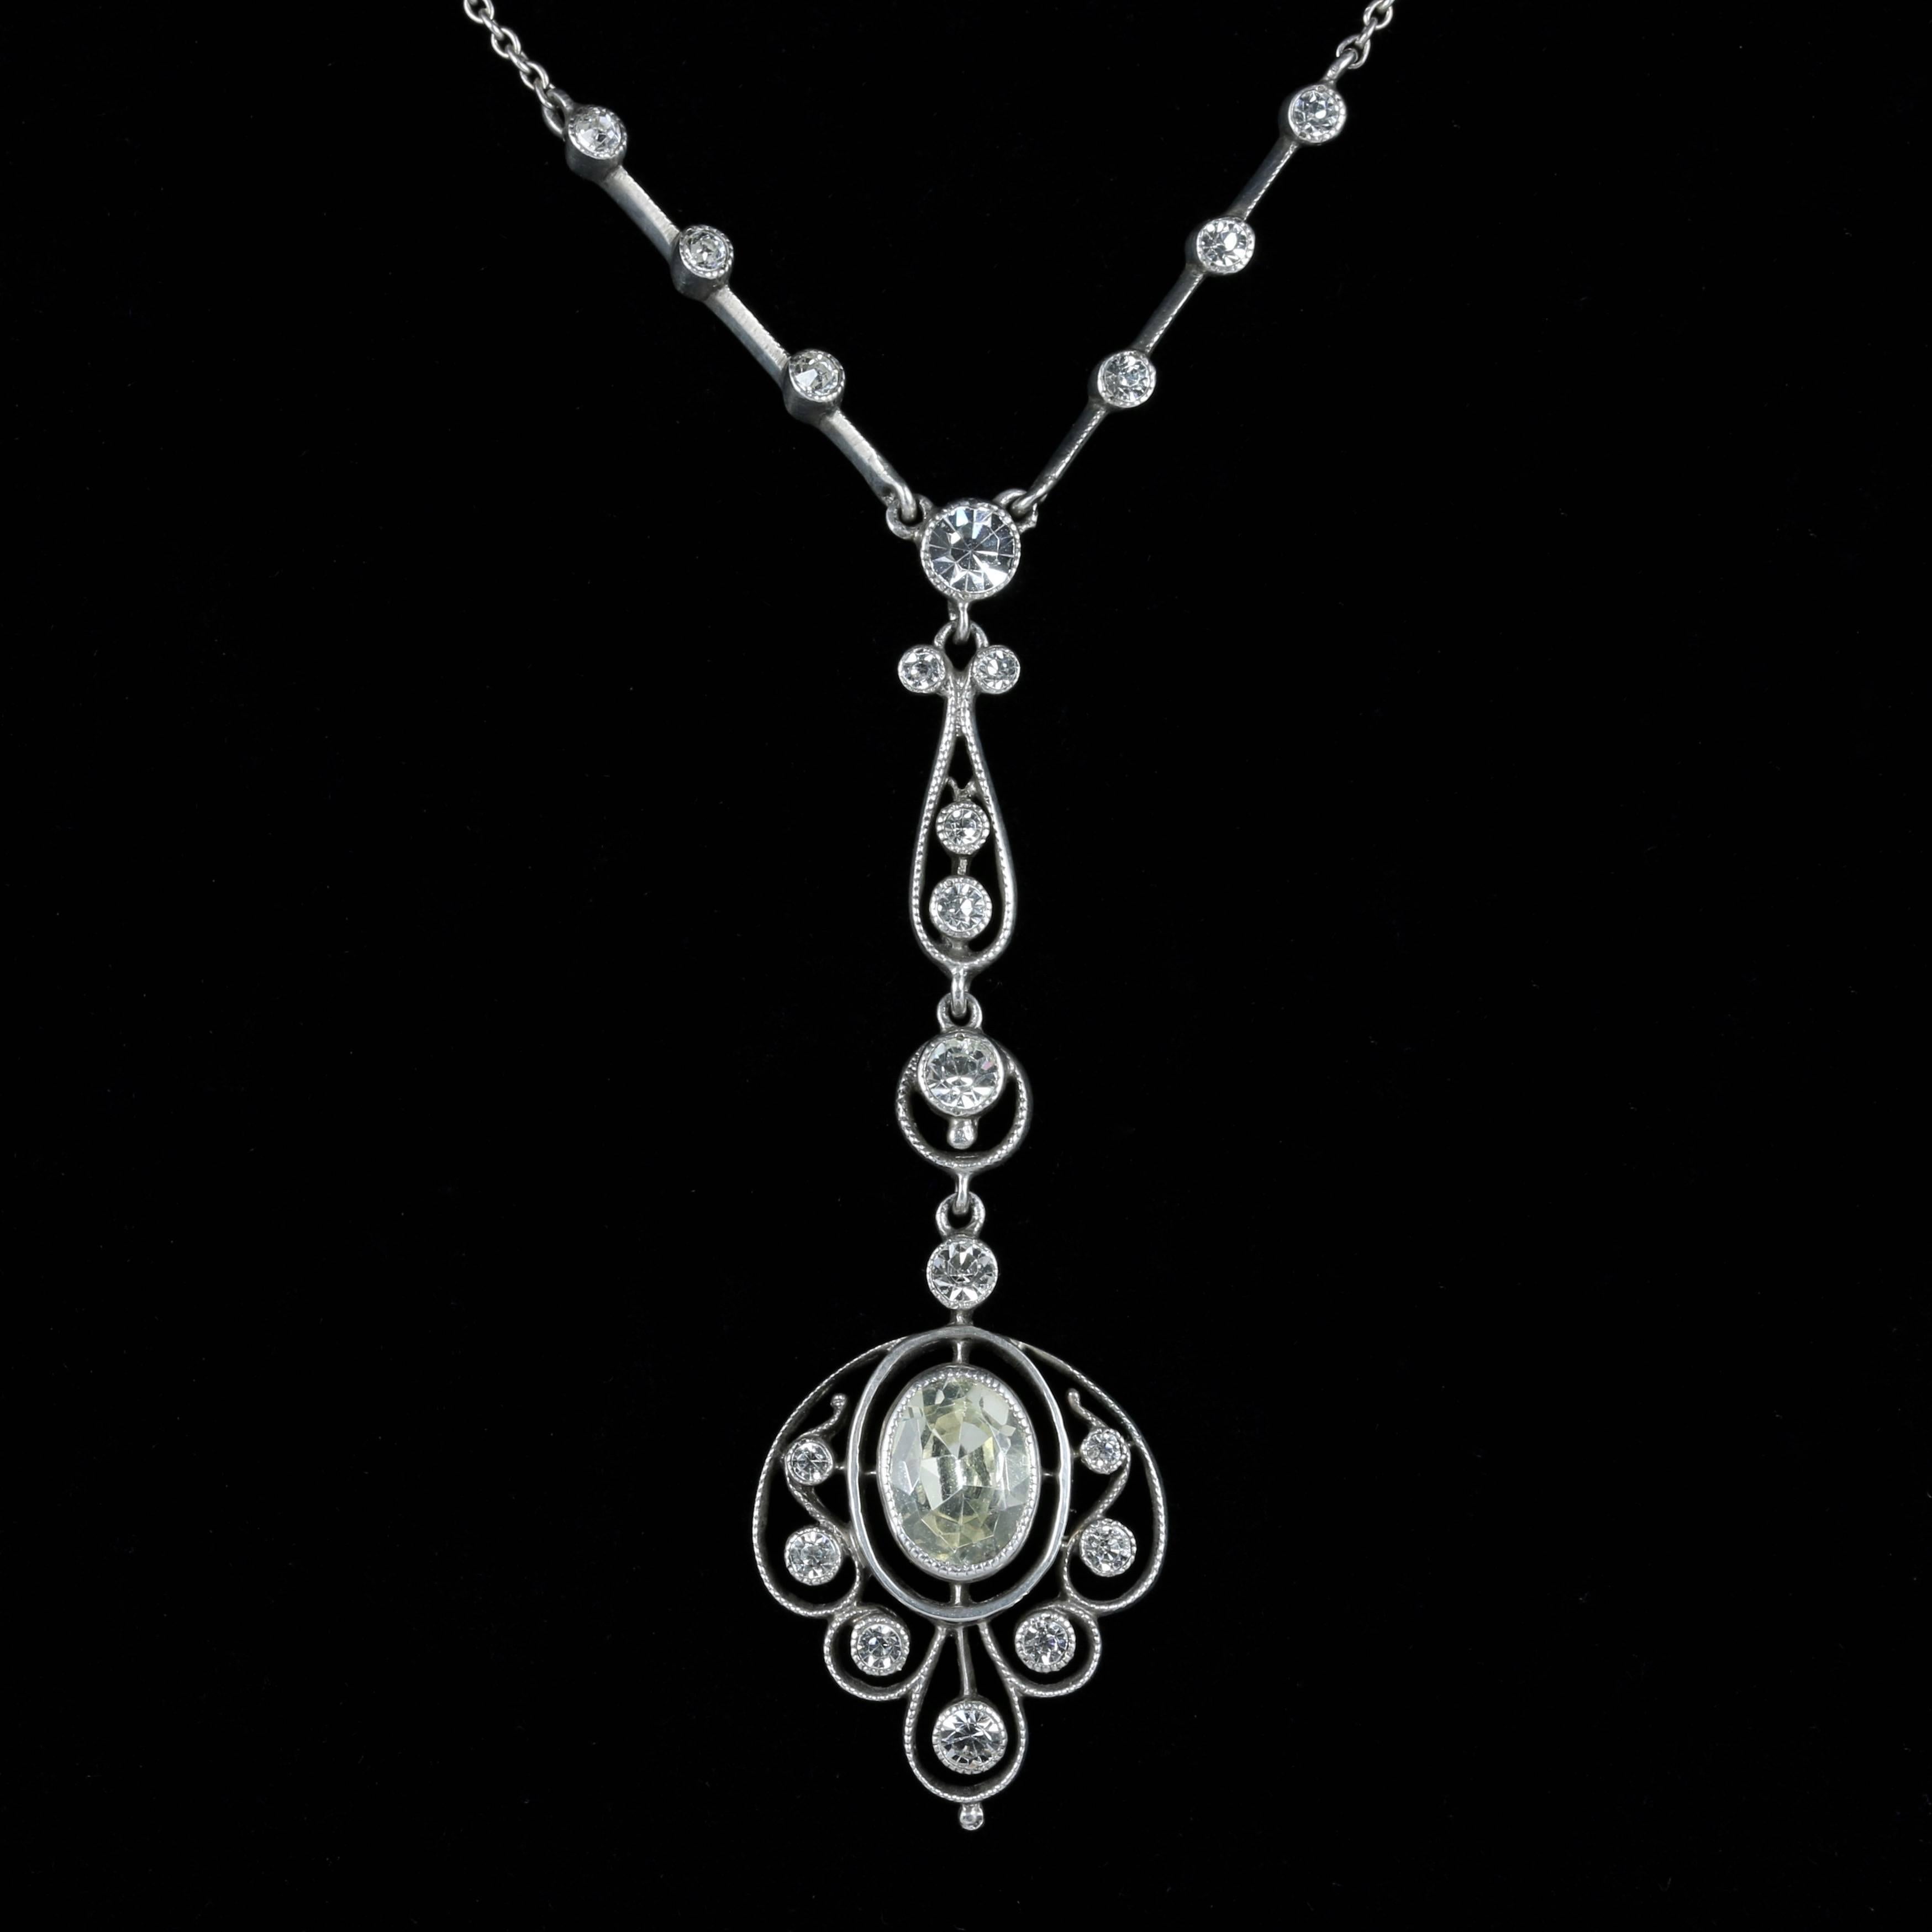 For more details please click continue reading down below..

This fabulous Silver Victorian Paste pendant necklace is Circa 1900.

21 lovely Paste stones adorn this beautiful necklace, the bottom large Paste stone is 1.5ct in size, they sparkle just